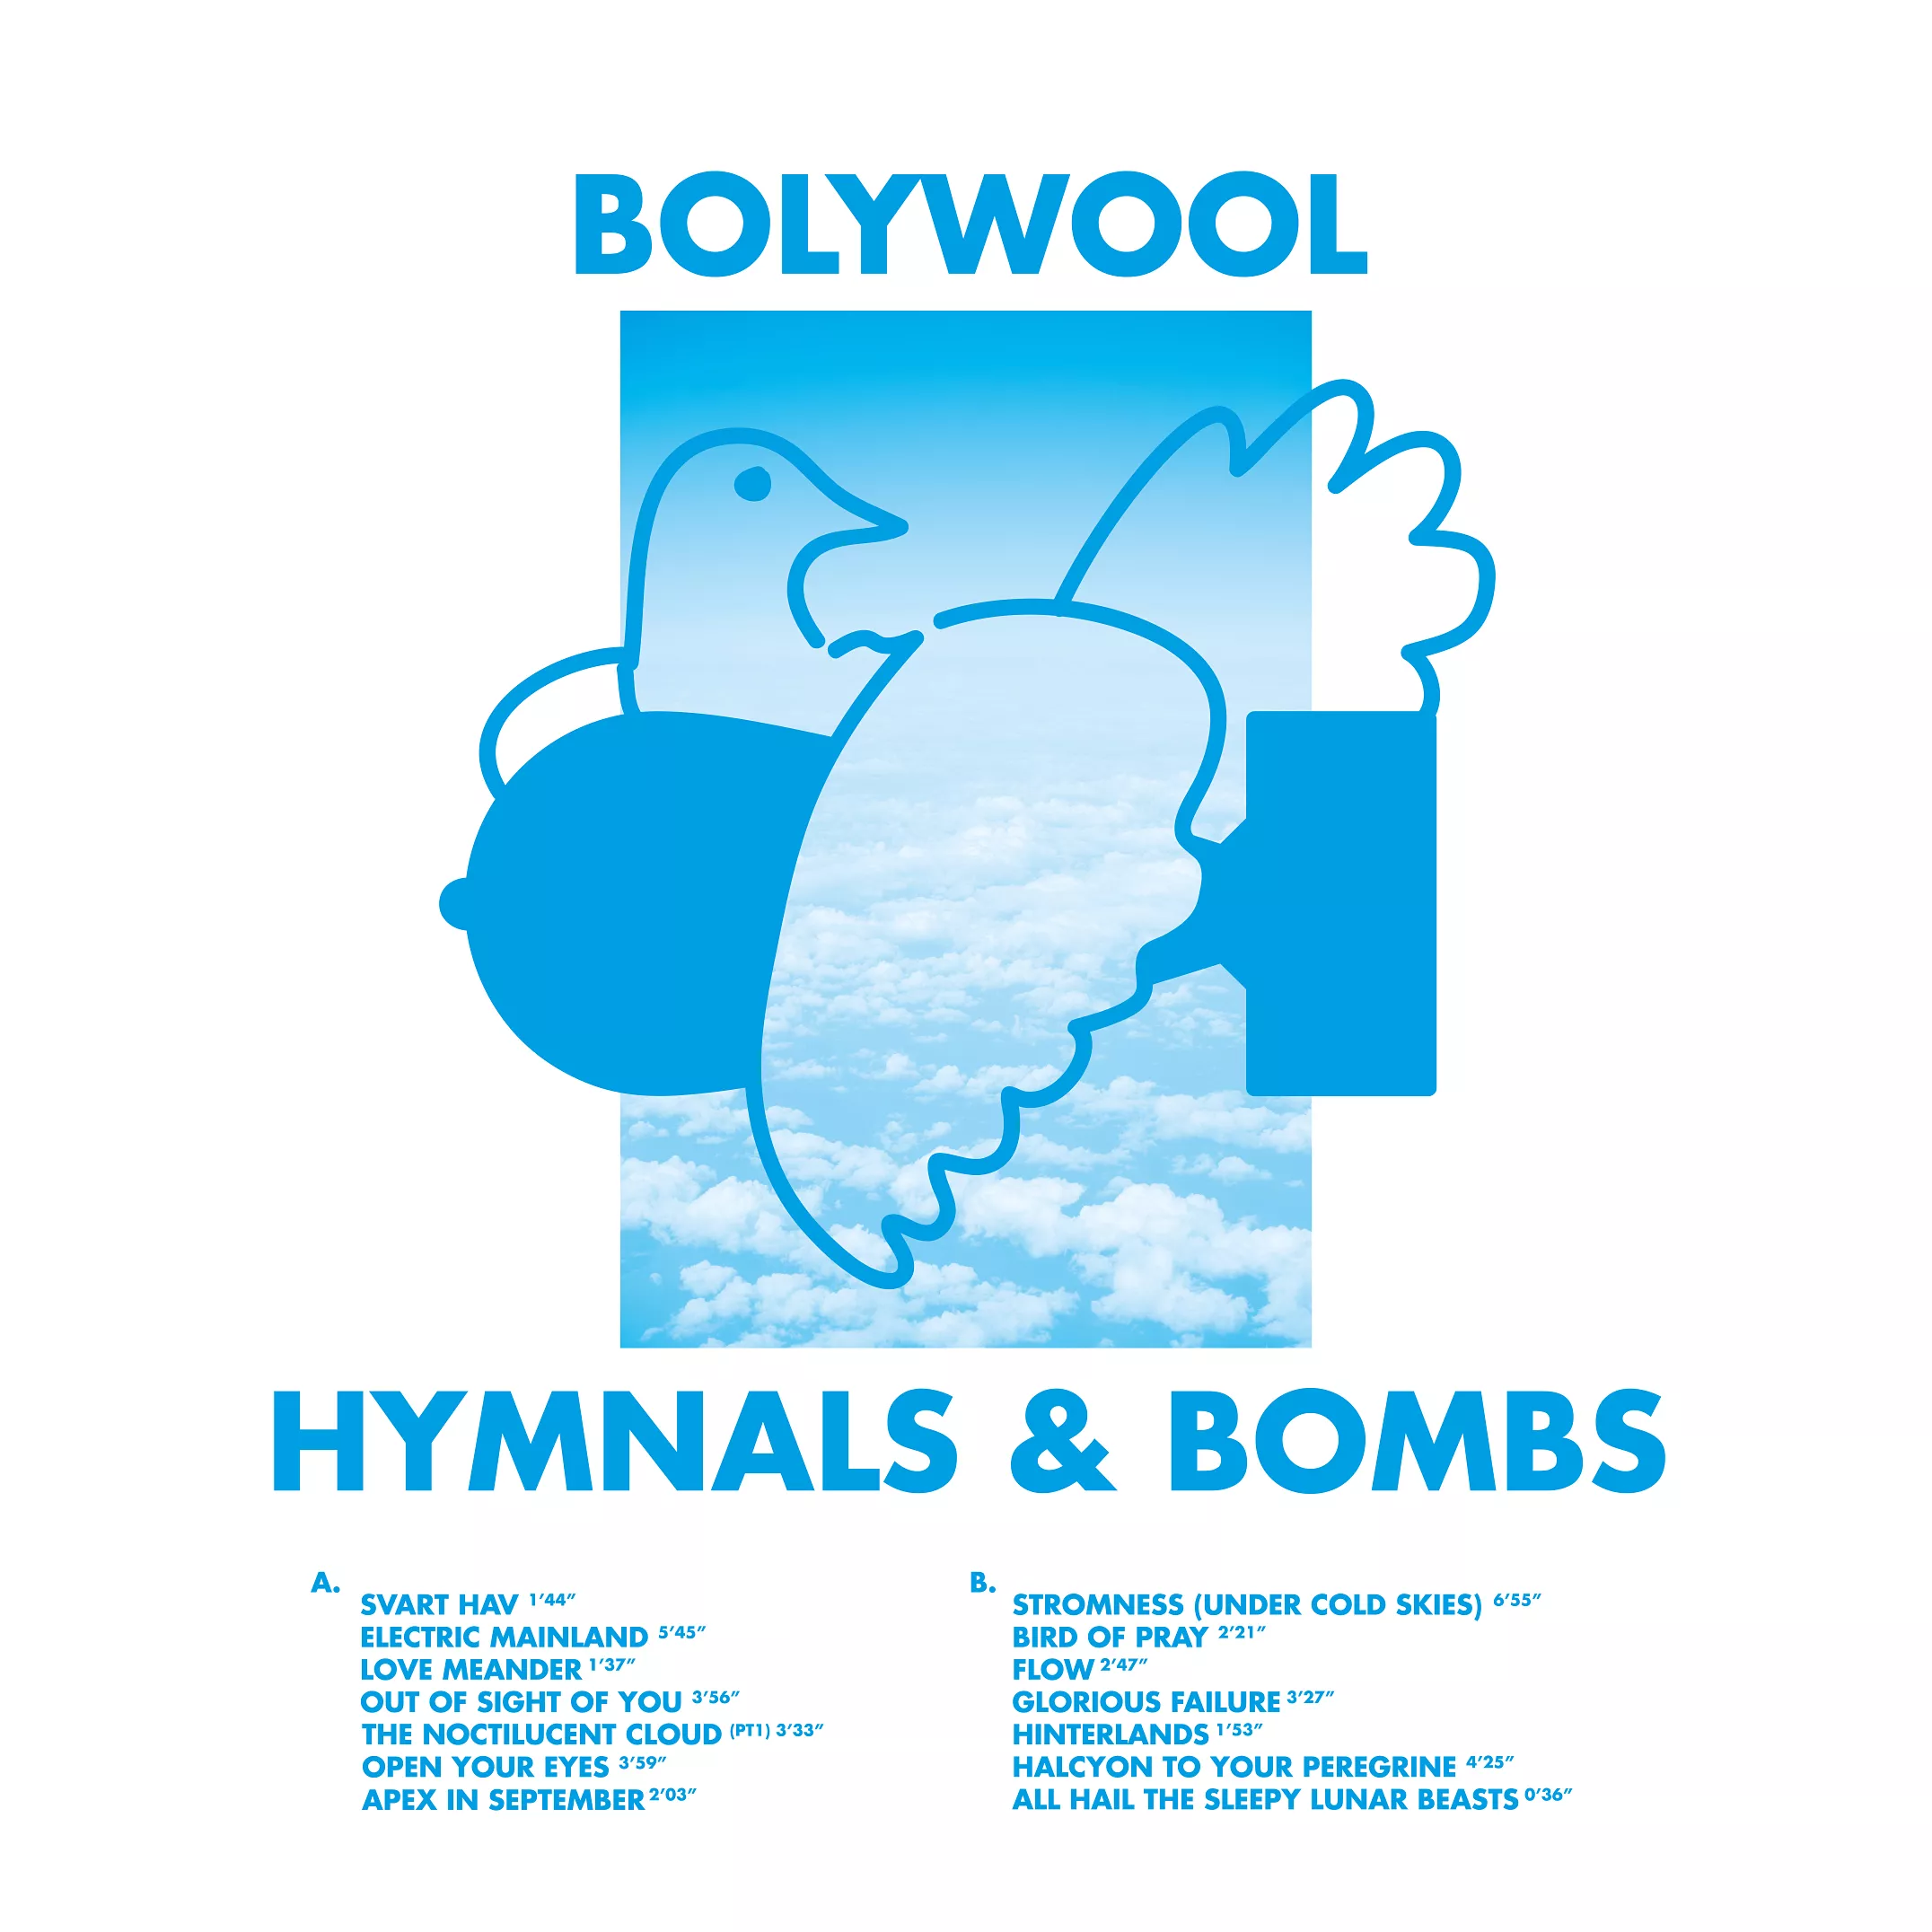 Hymnals & Bombs - Bolywool